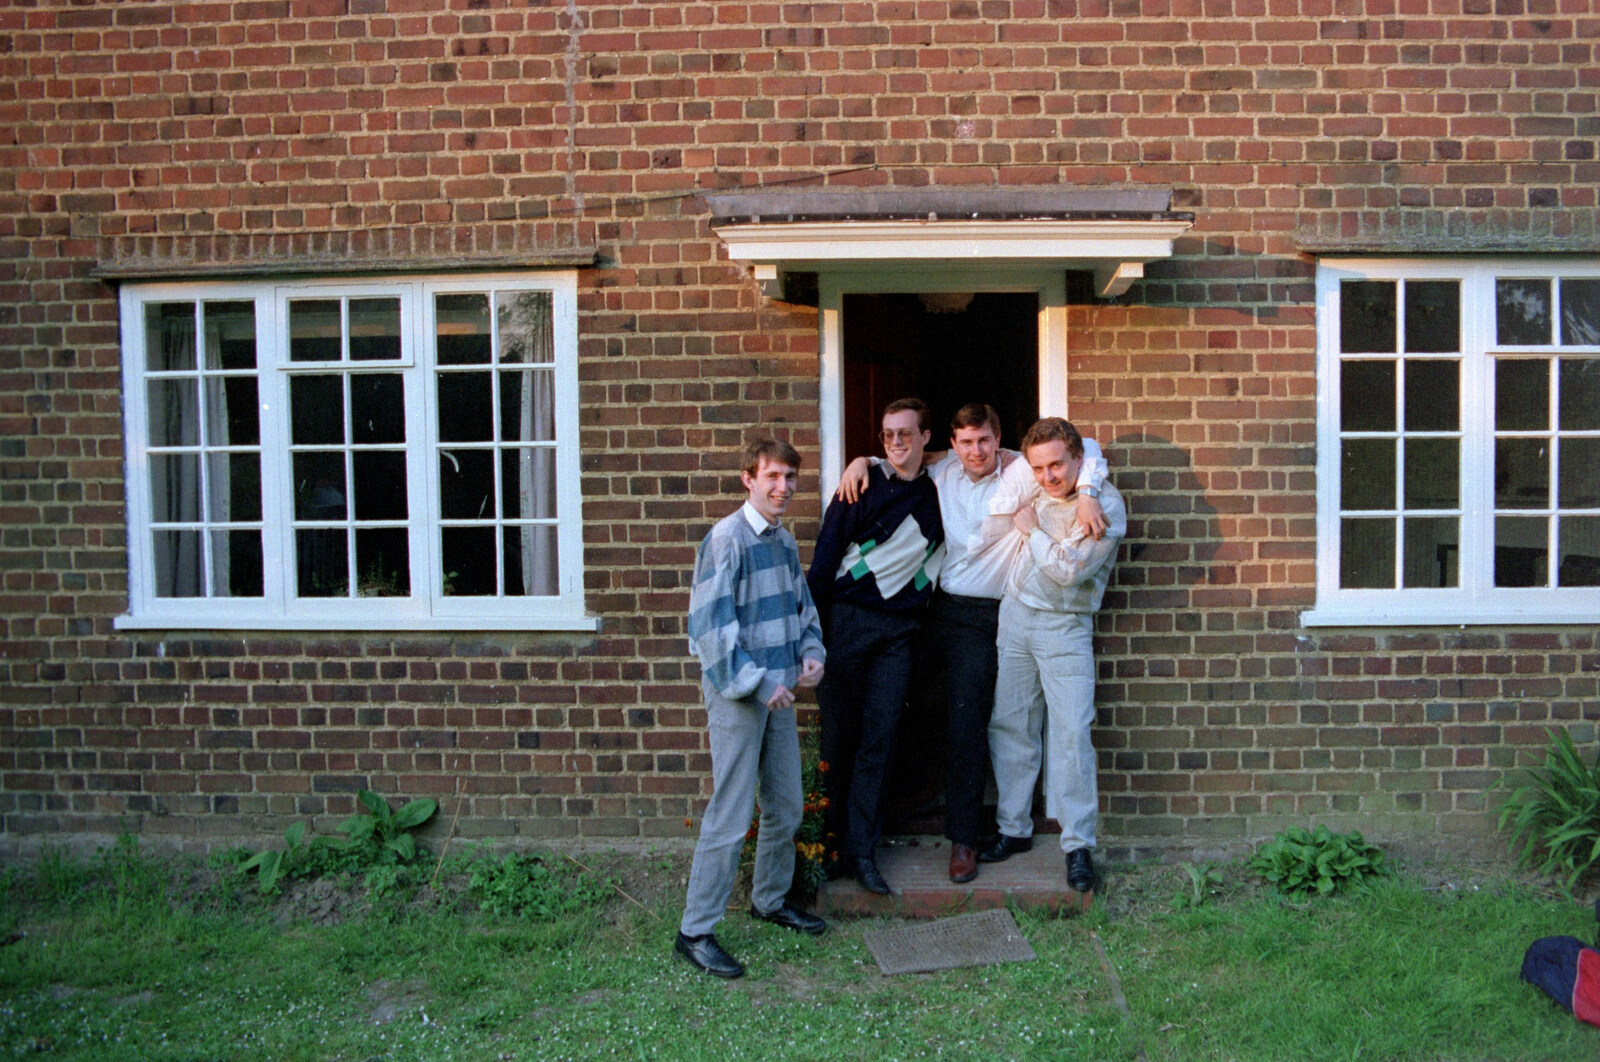 The lads mess around outside the front door from The Plymouth Gang Visits Nosher in the Sticks, Red House, Buxton, Norfolk - 20th May 1988